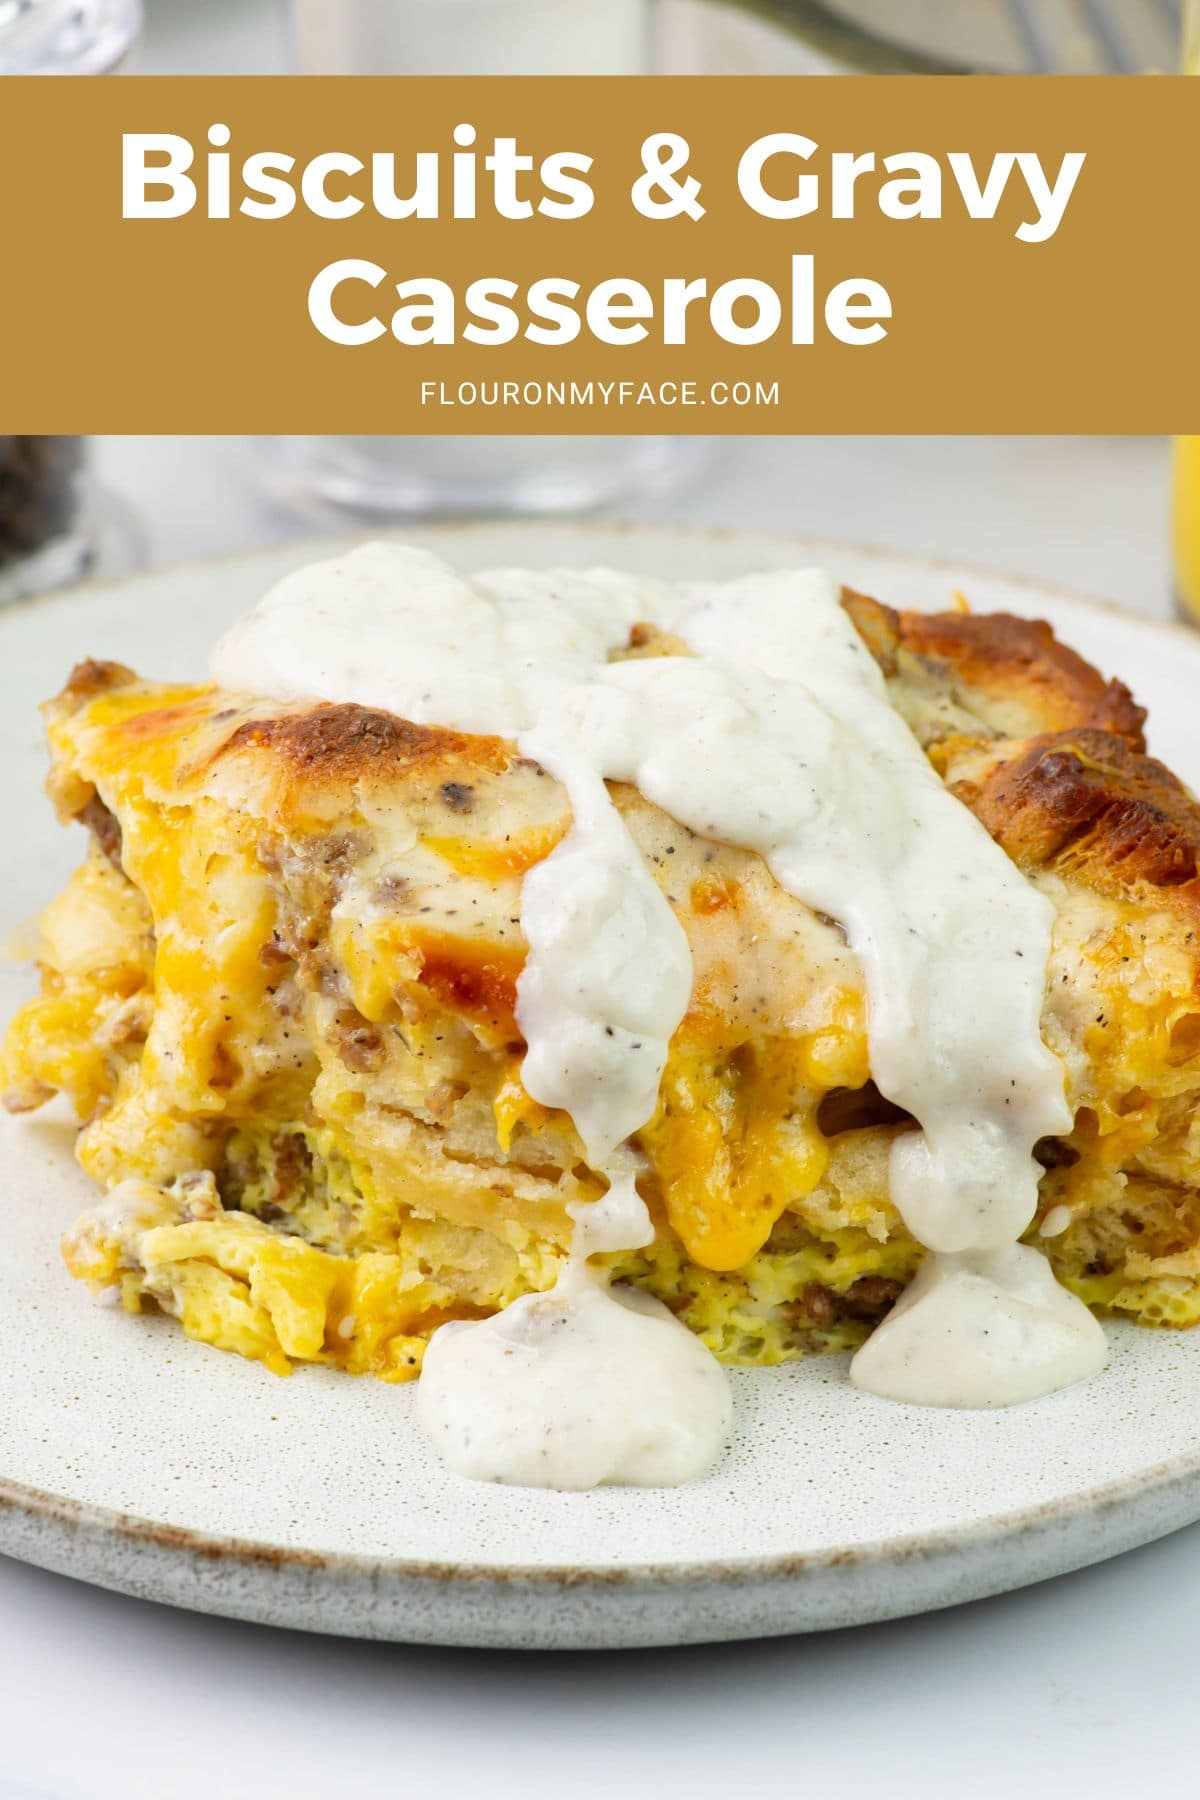 Large vertical image of a slice of breakfast casserole on a plate.